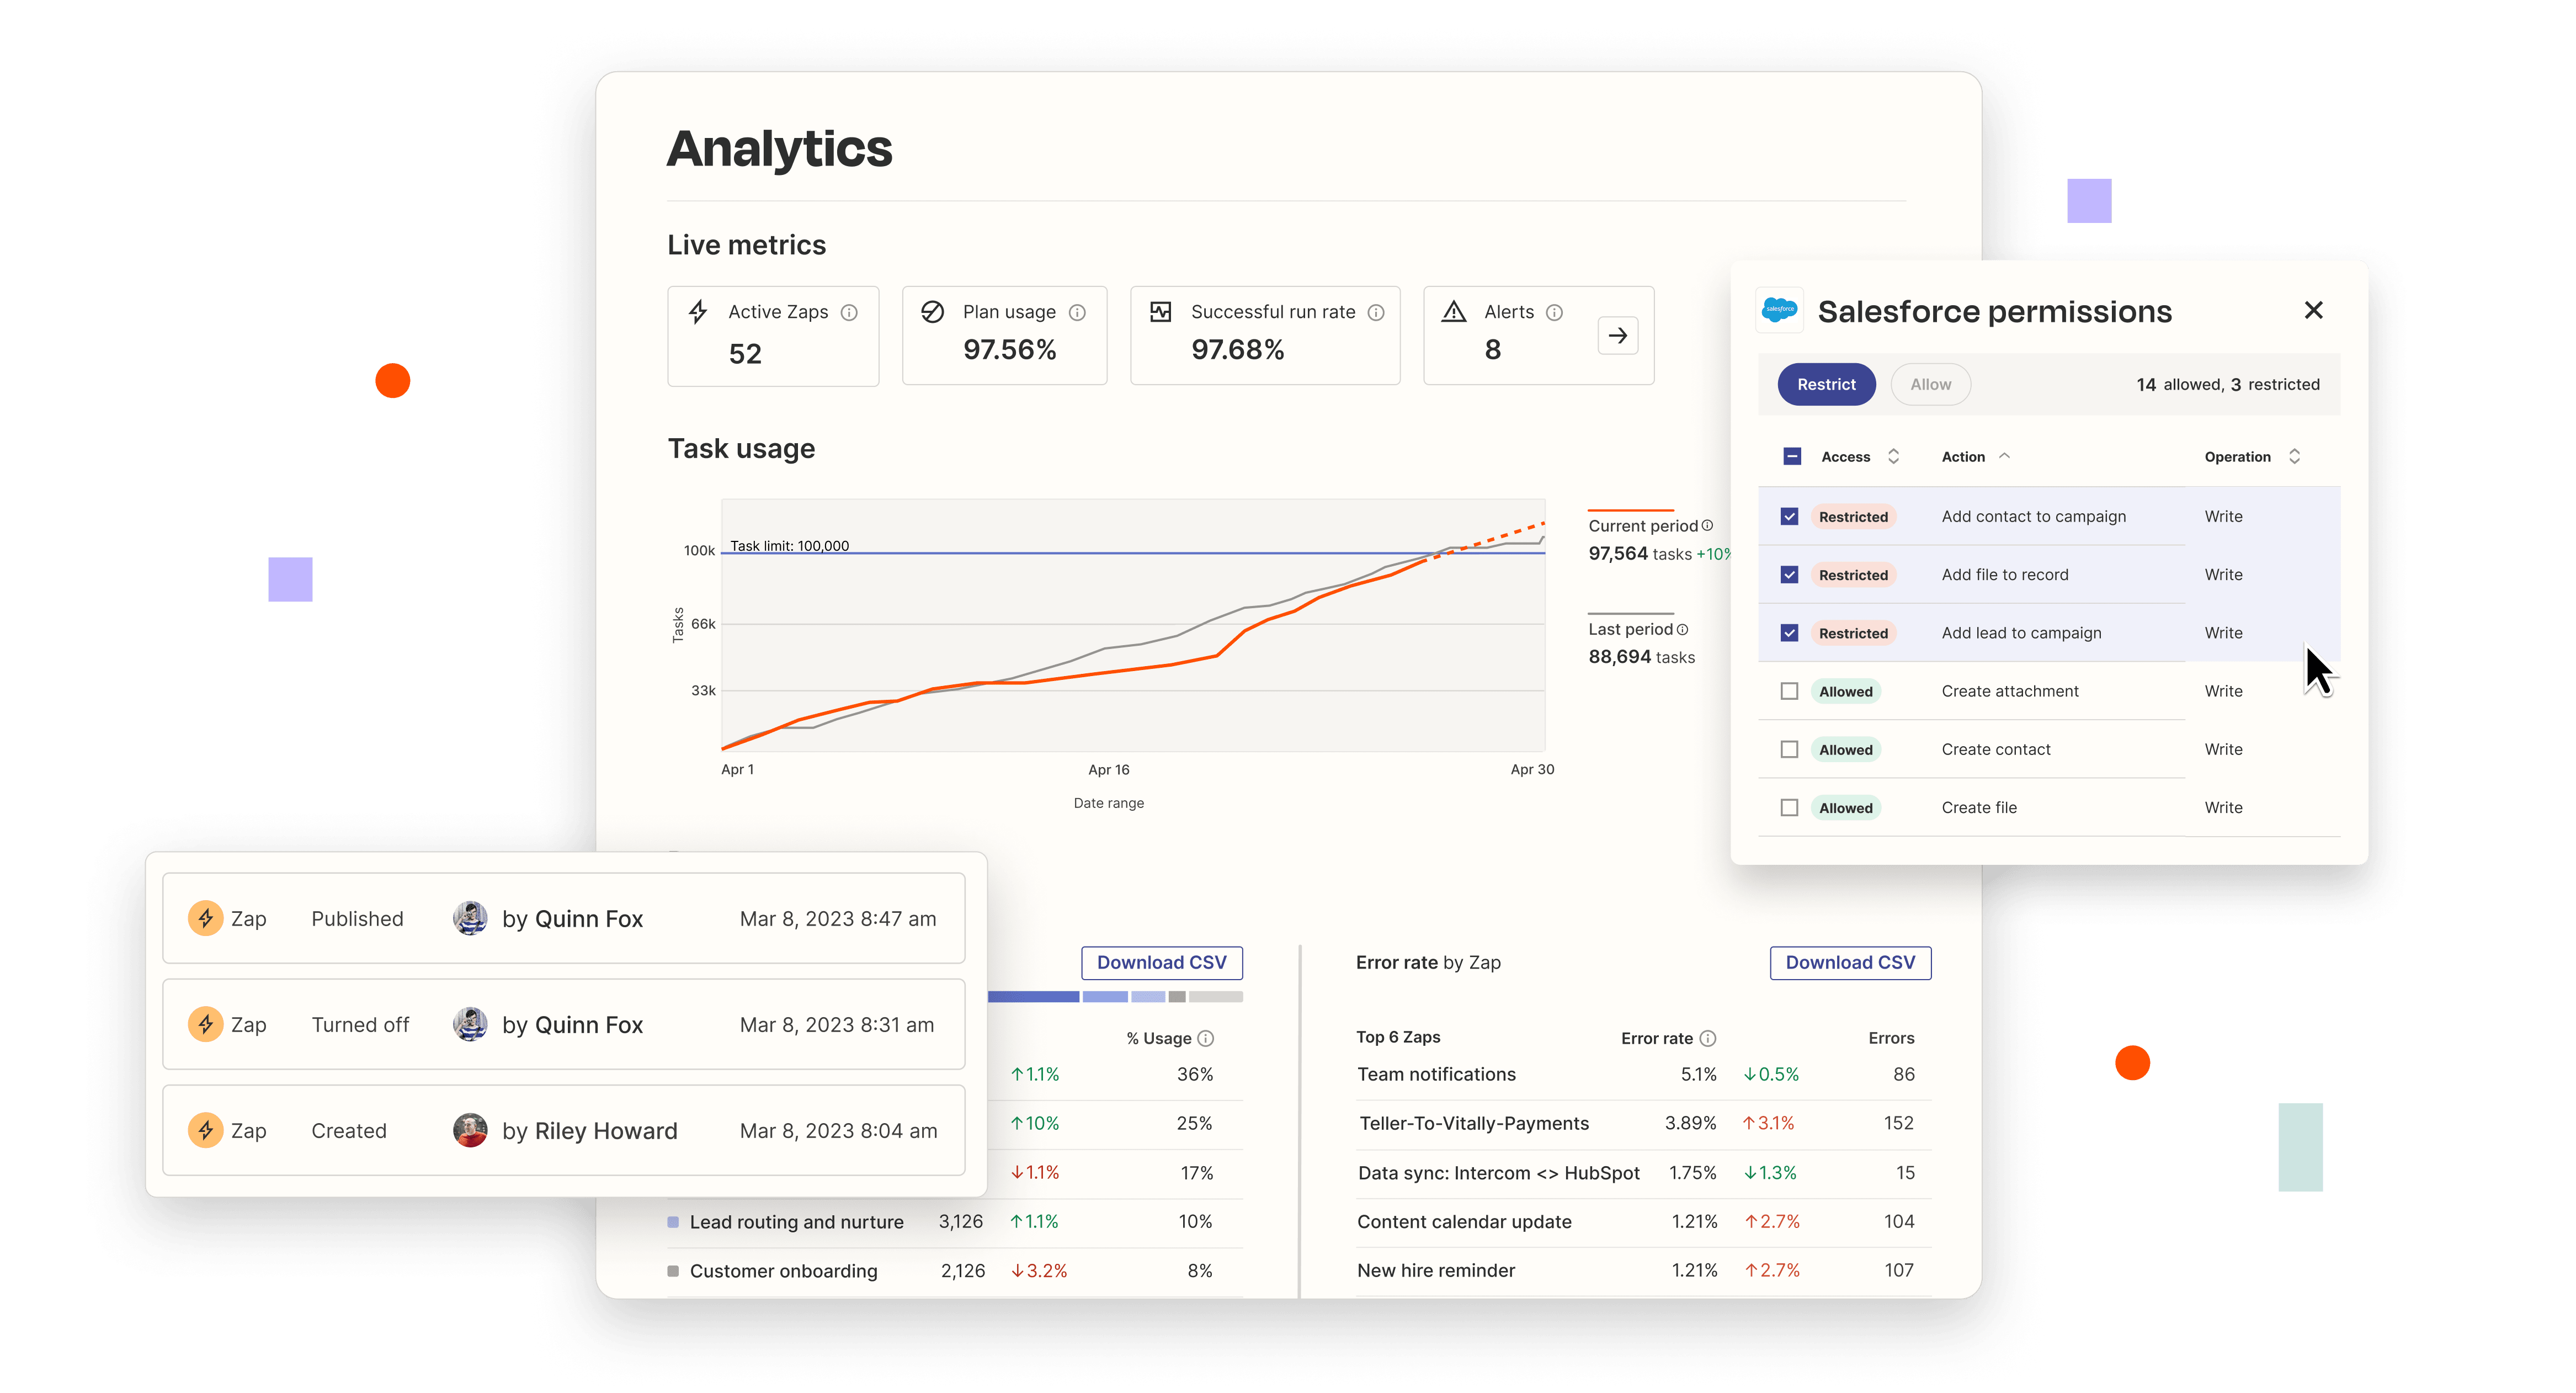 An analytics dashboard showing task usage, reports of top zaps and apps, featuring an audit log and app restrictions.